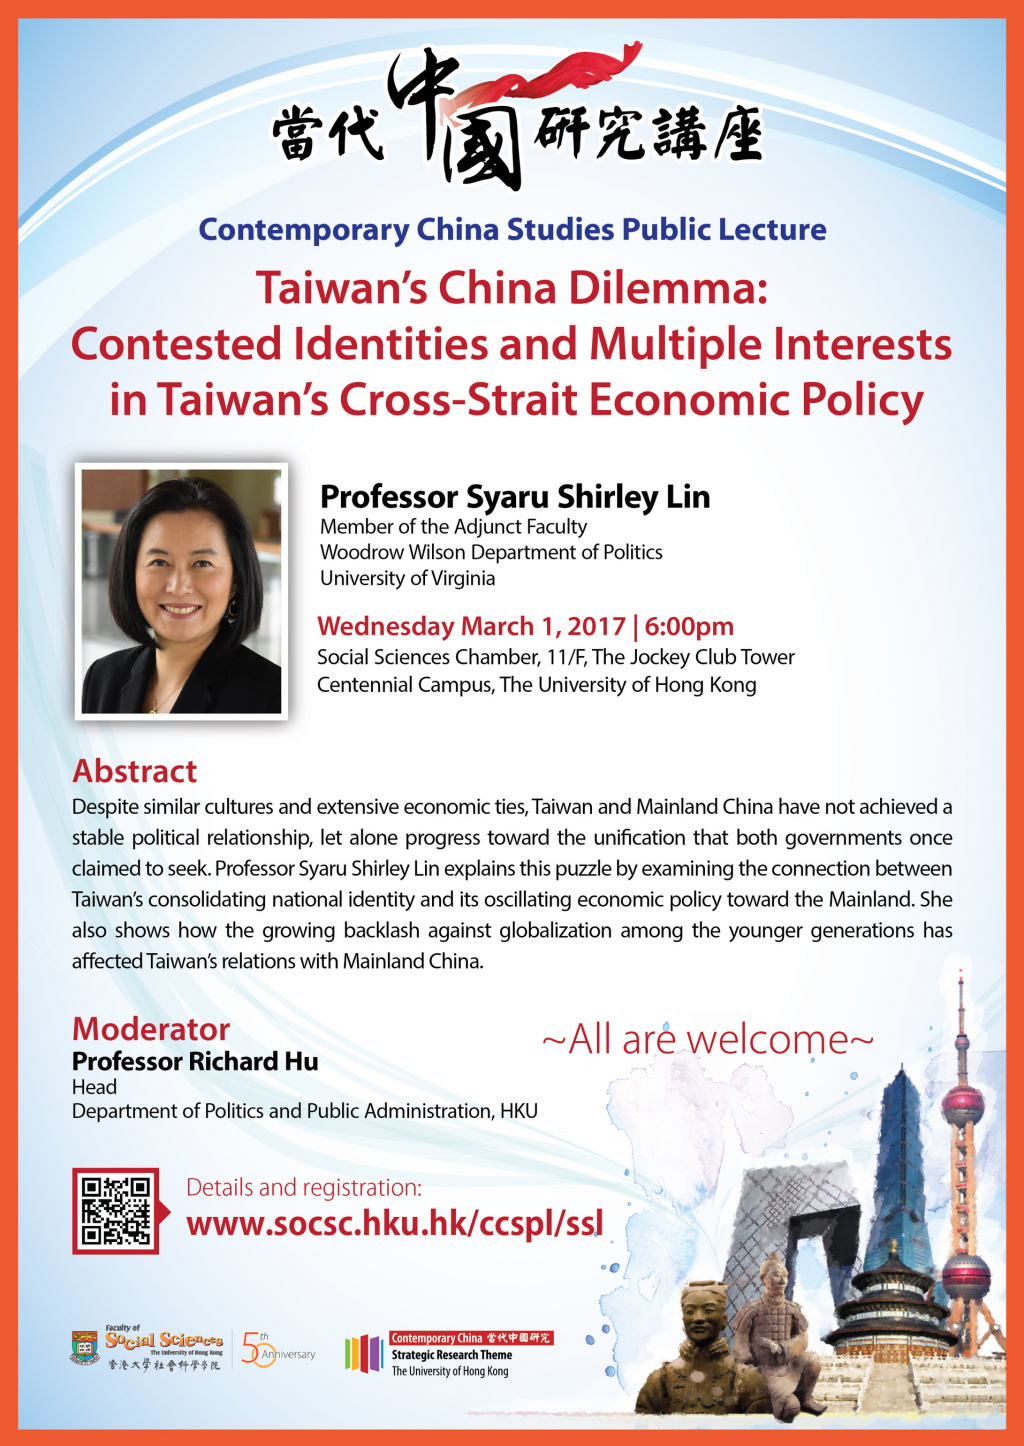 Taiwan's China Dilemma: Contested Identities and Multiple Interests in Taiwan's Cross-Strait Economic Policy